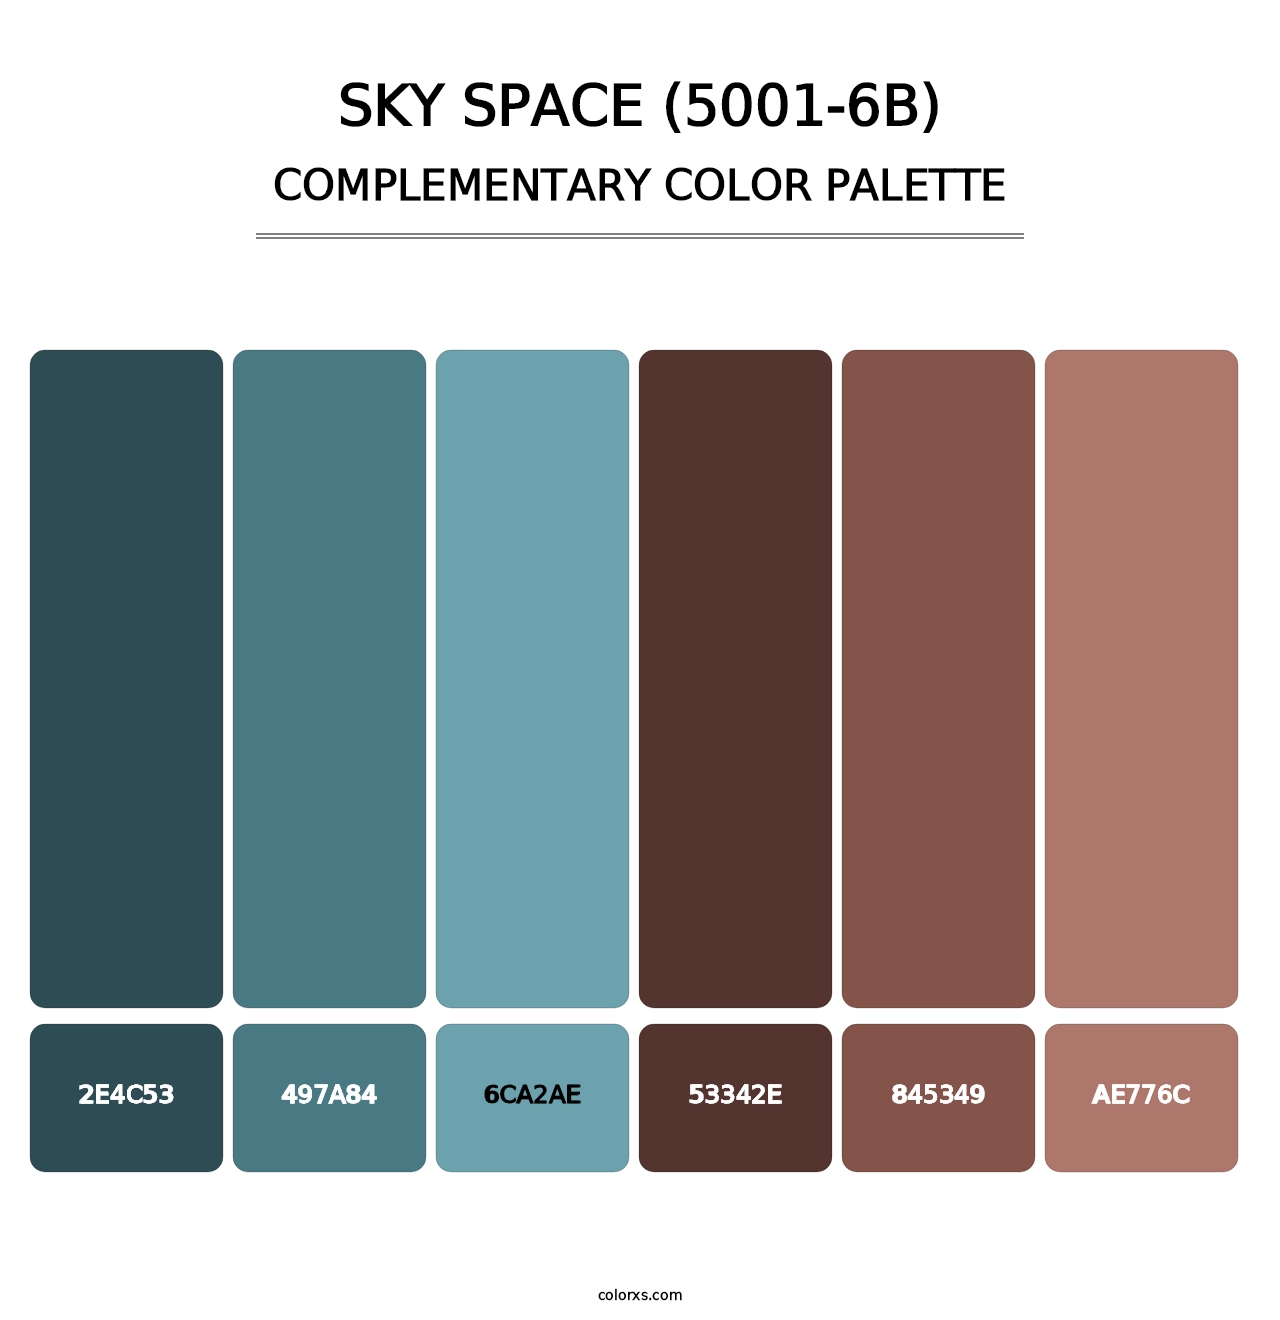 Sky Space (5001-6B) - Complementary Color Palette